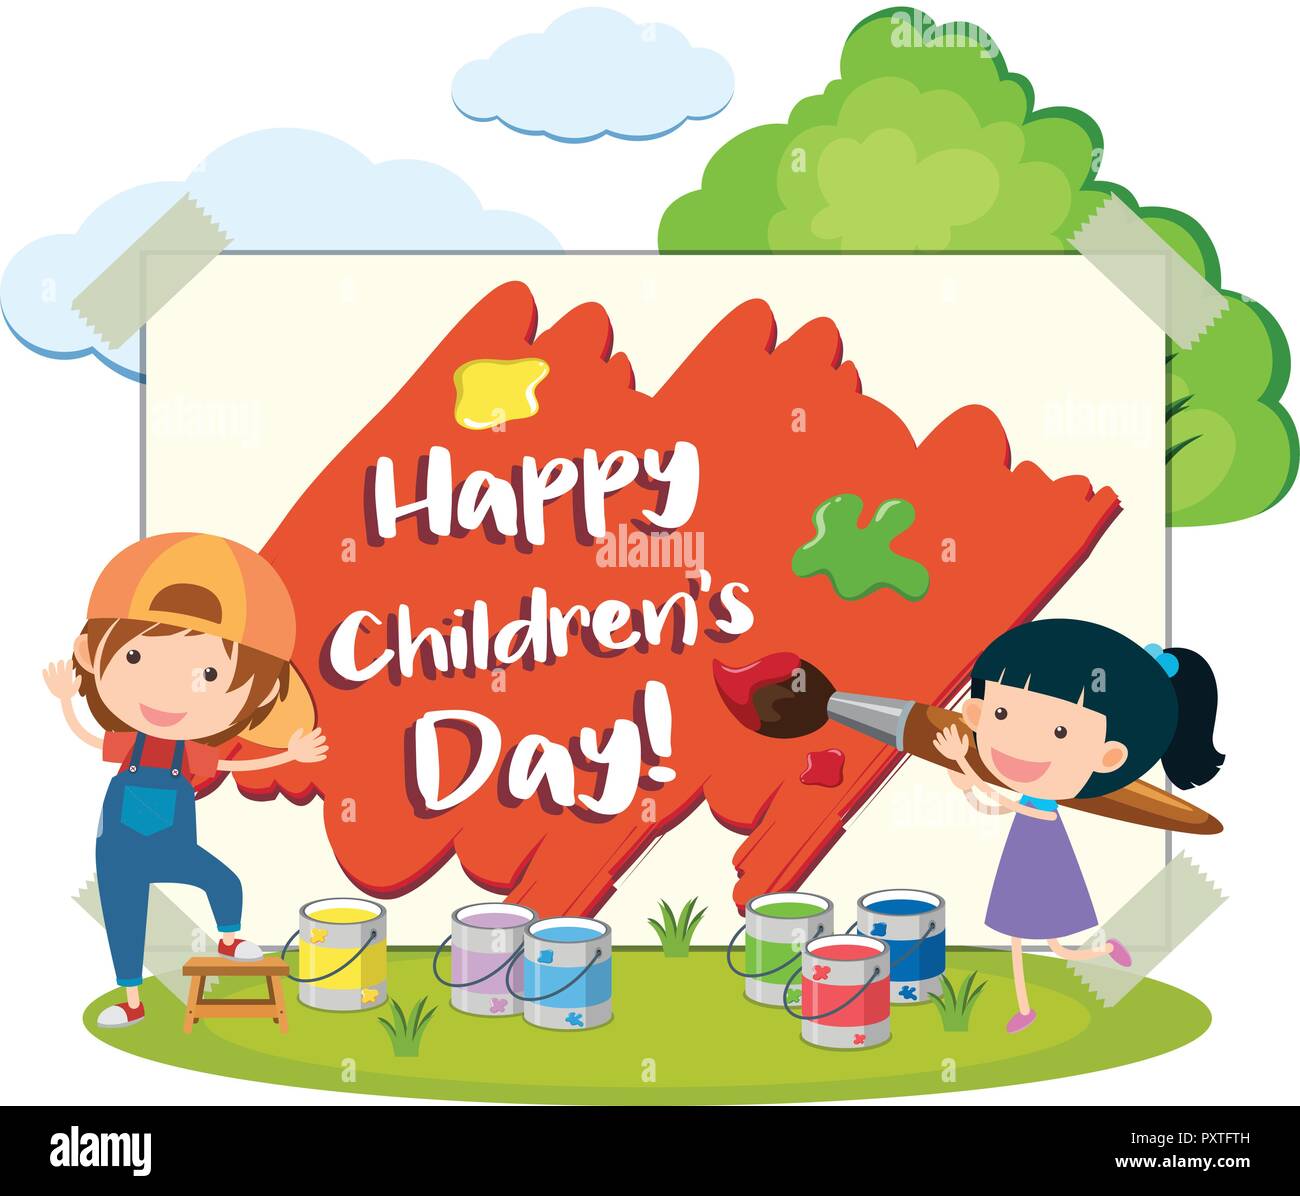 Happy children's day card with kids in the park illustration Stock ...